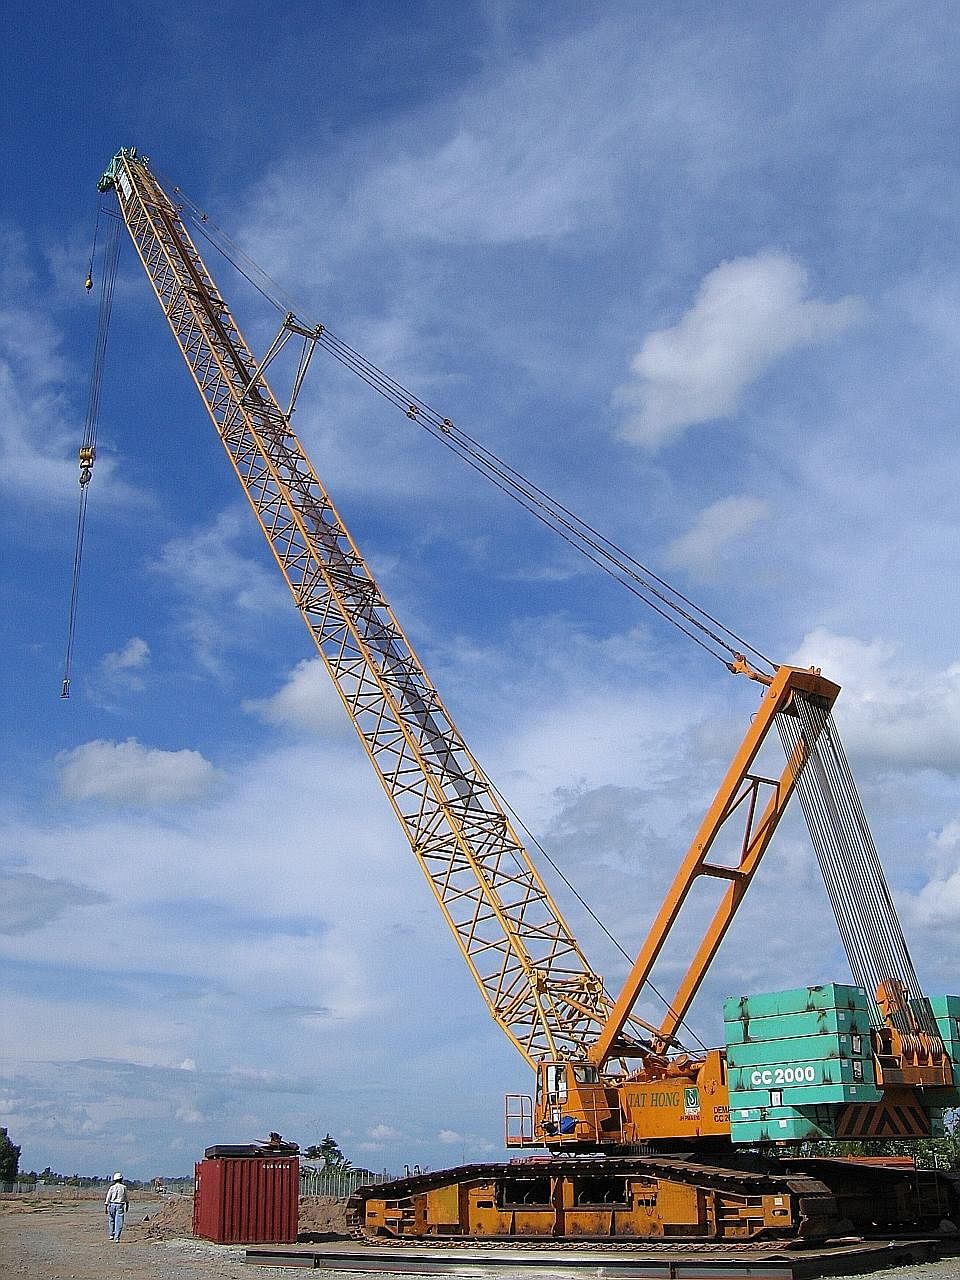 An oversupply of cranes in the market has hit Tat Hong's earnings. Turnover on rentals of cranes and general equipment has also been low.